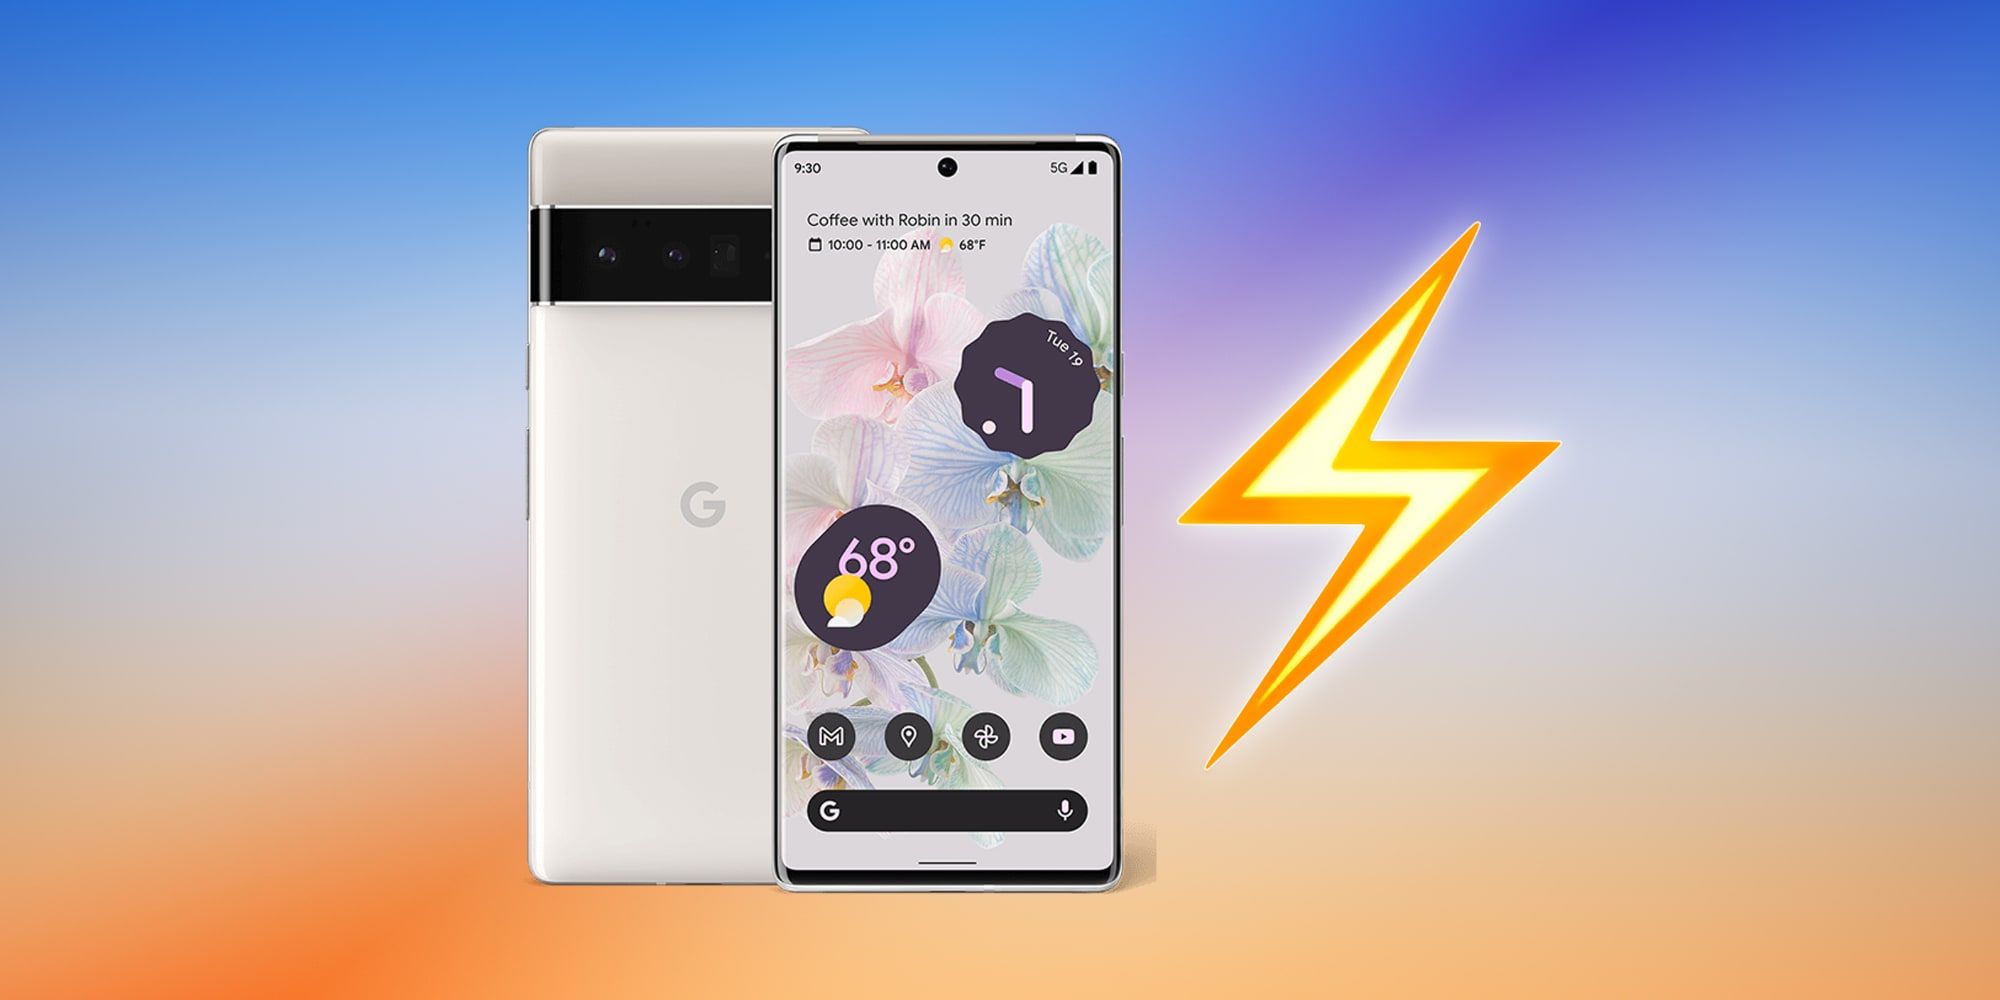 Google Pixel 6 Wireless Charging Vs Wired Charging Which Is Faster - Wechoiceblogger